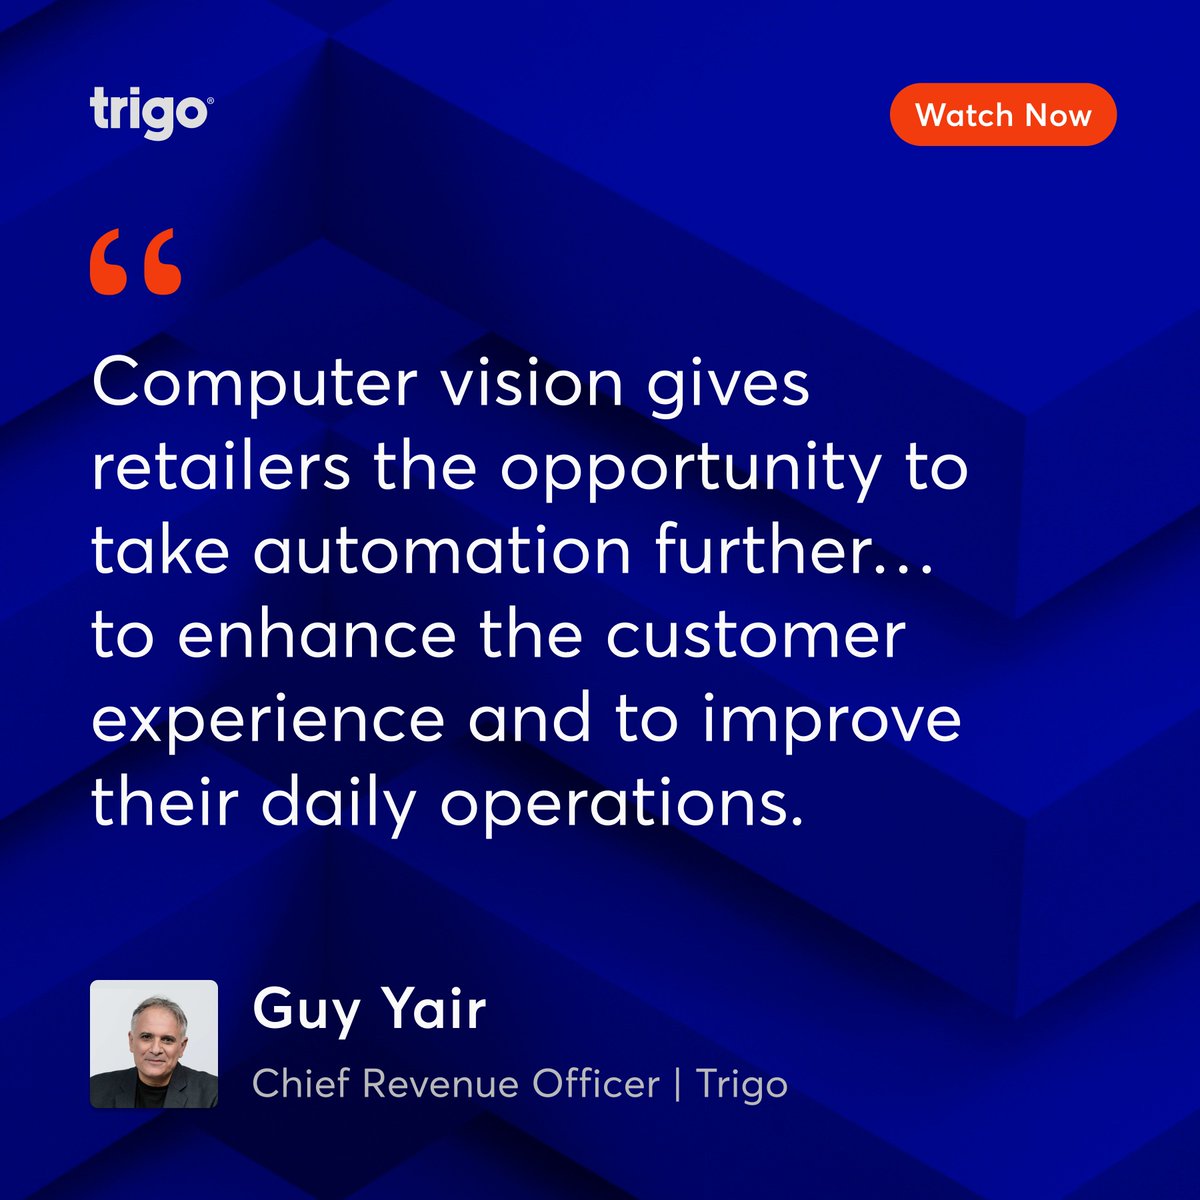 When it comes to retail, the potential of computer vision is boundless. Don't be left behind, click here to explore more: bit.ly/3OscUoS #ComputerVision #Innovation #FutureOfRetail #Trigo #RetailRevolution